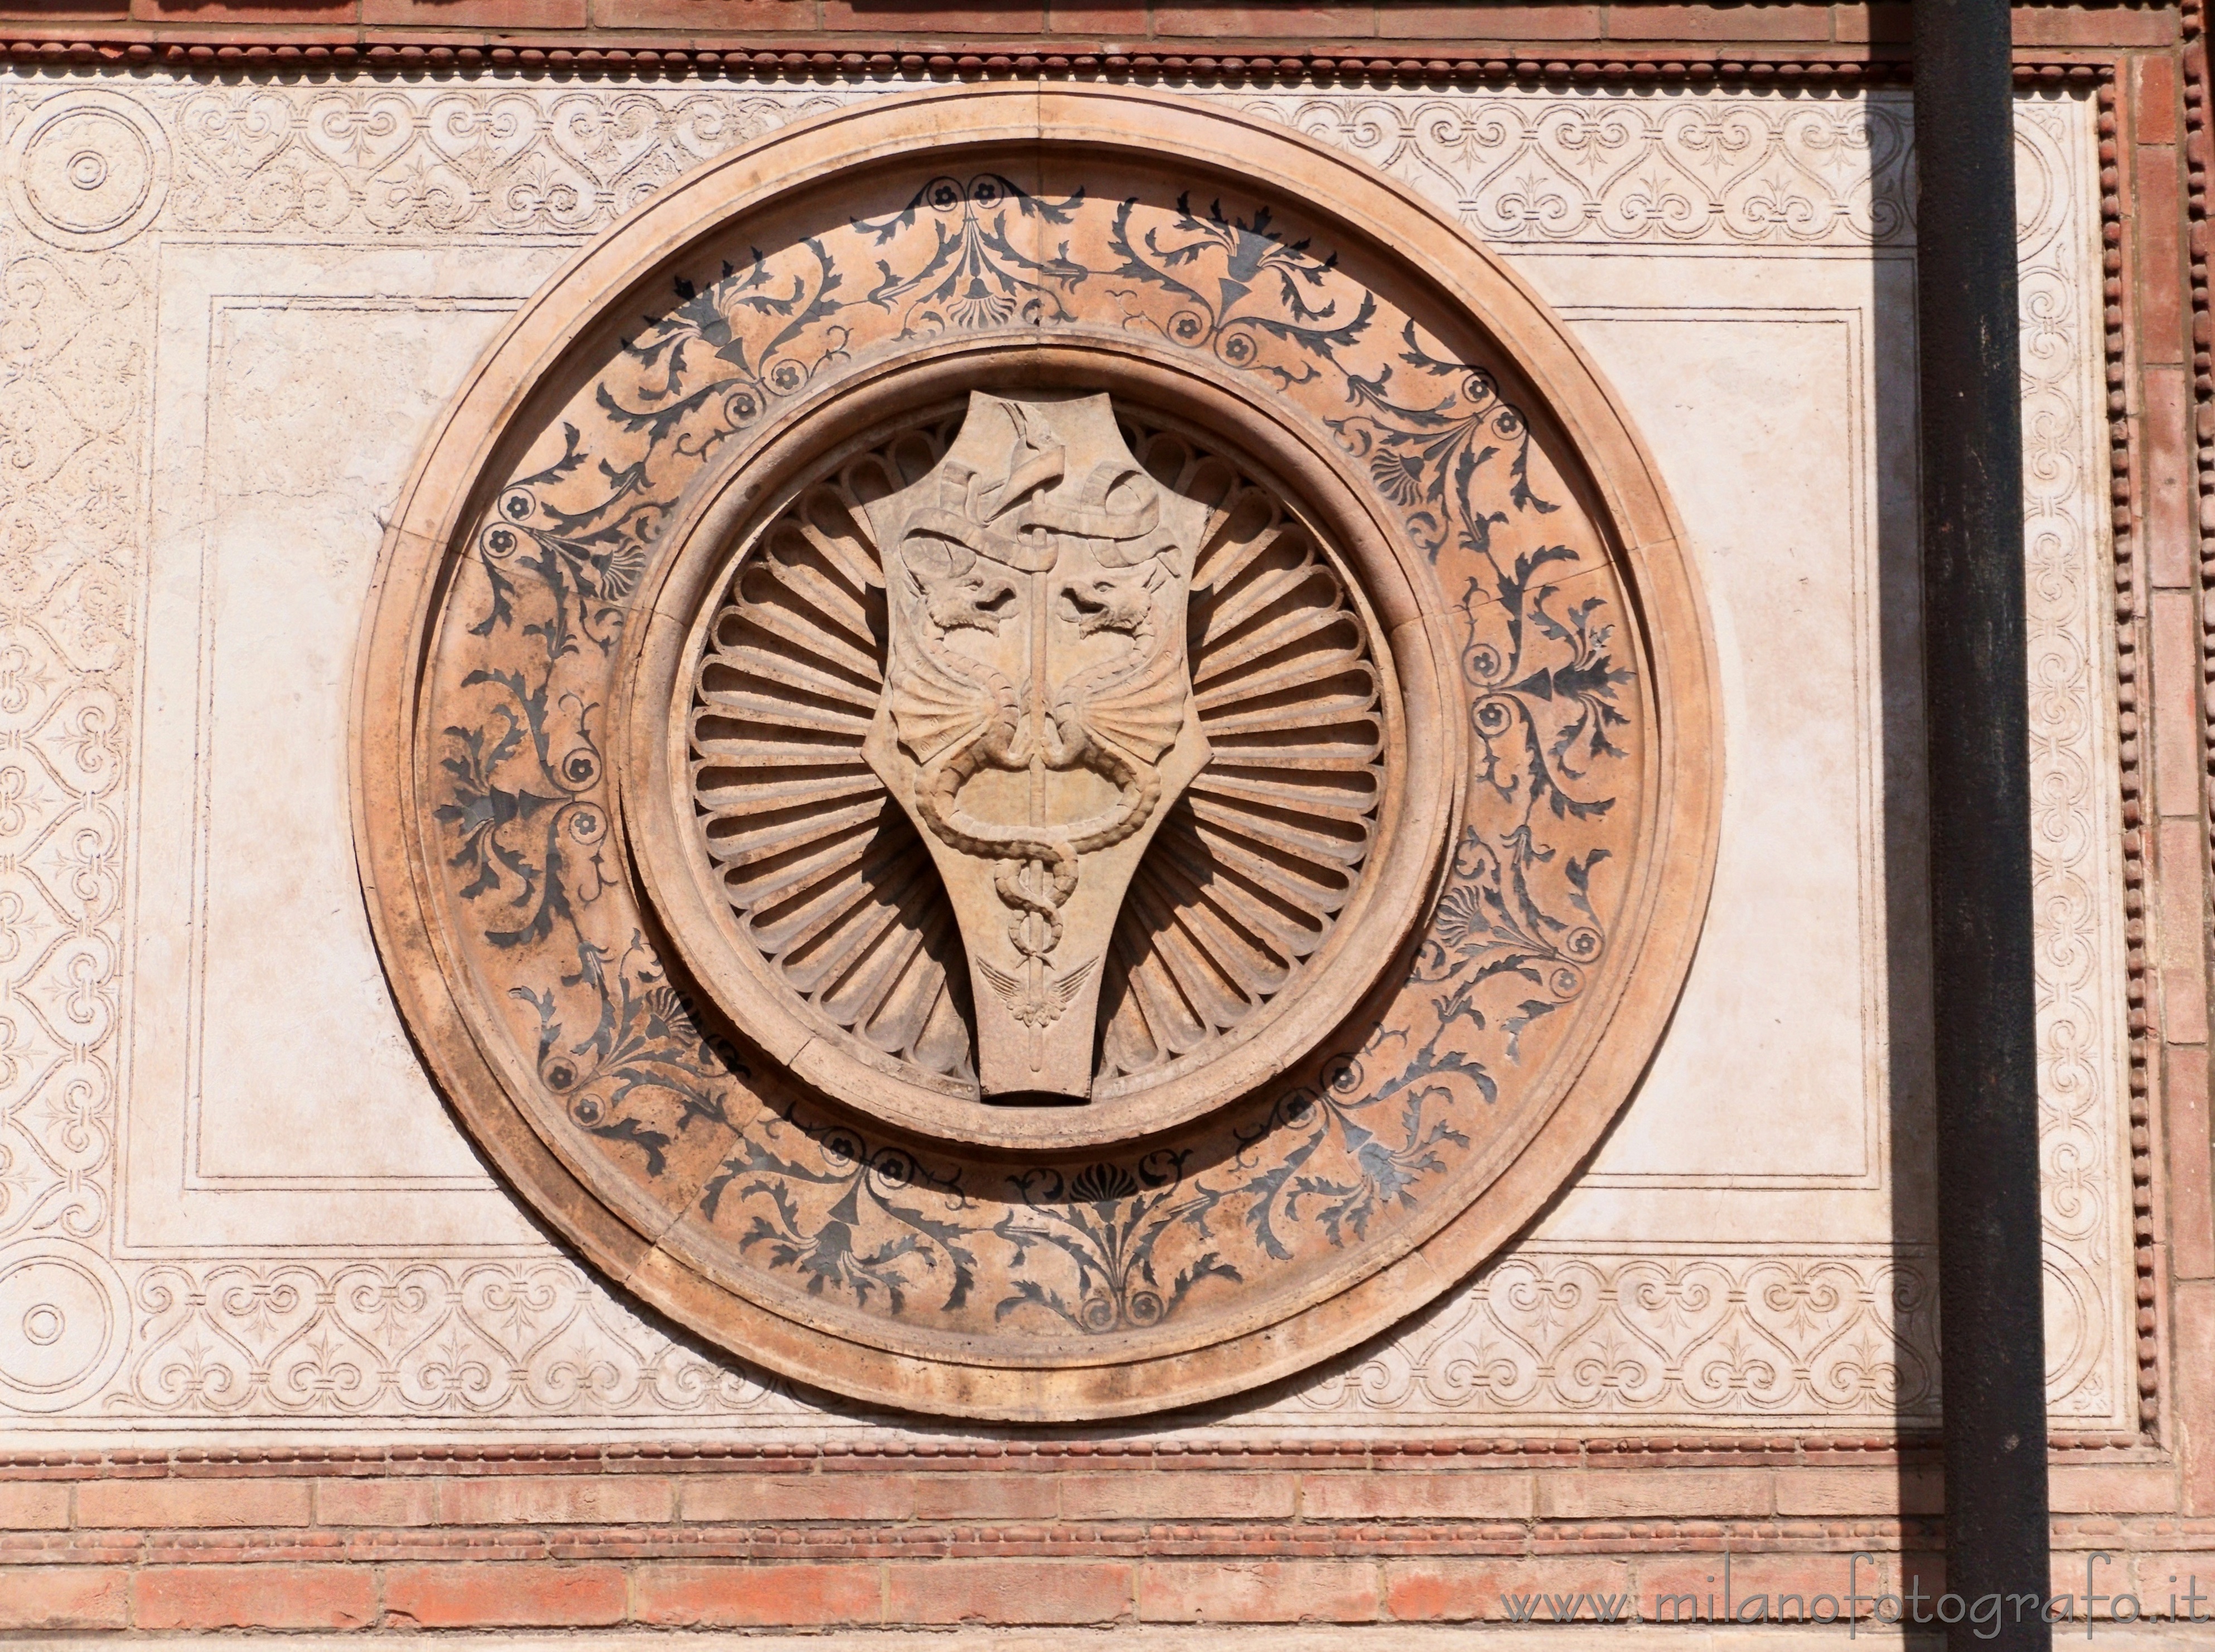 Milan (Italy): Coat-of-arms on one side of the Basilica of Santa Maria delle Grazie
 - Milan (Italy)